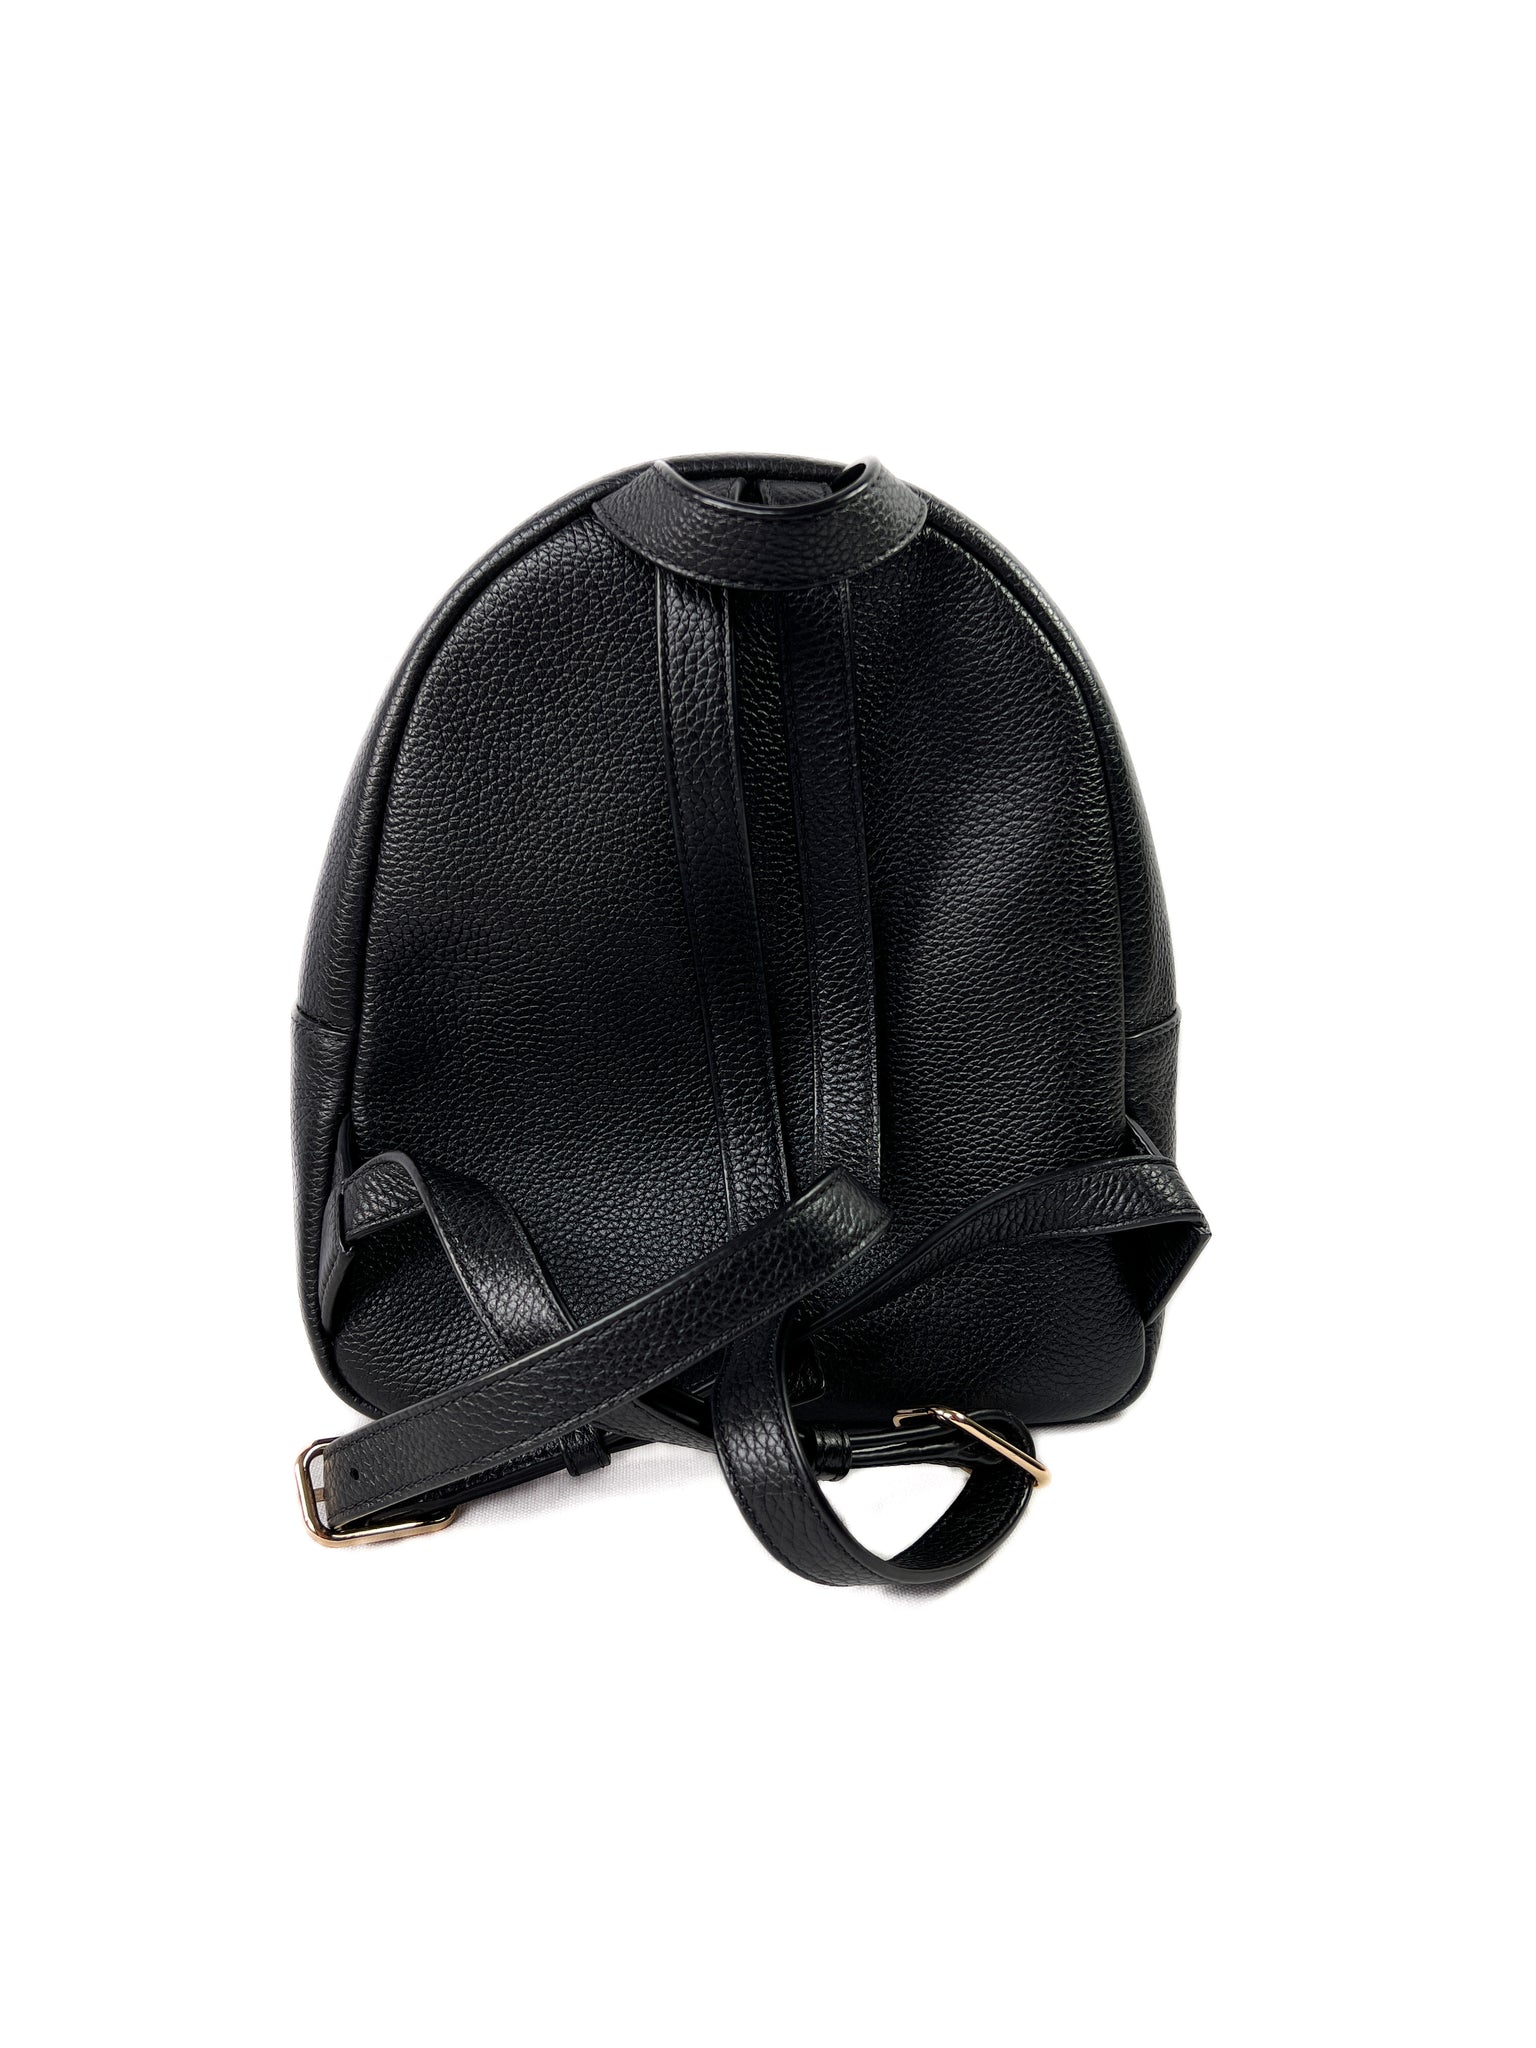 Tory Burch Thea Drawstring Leather Backpack Black, $495, Neiman Marcus